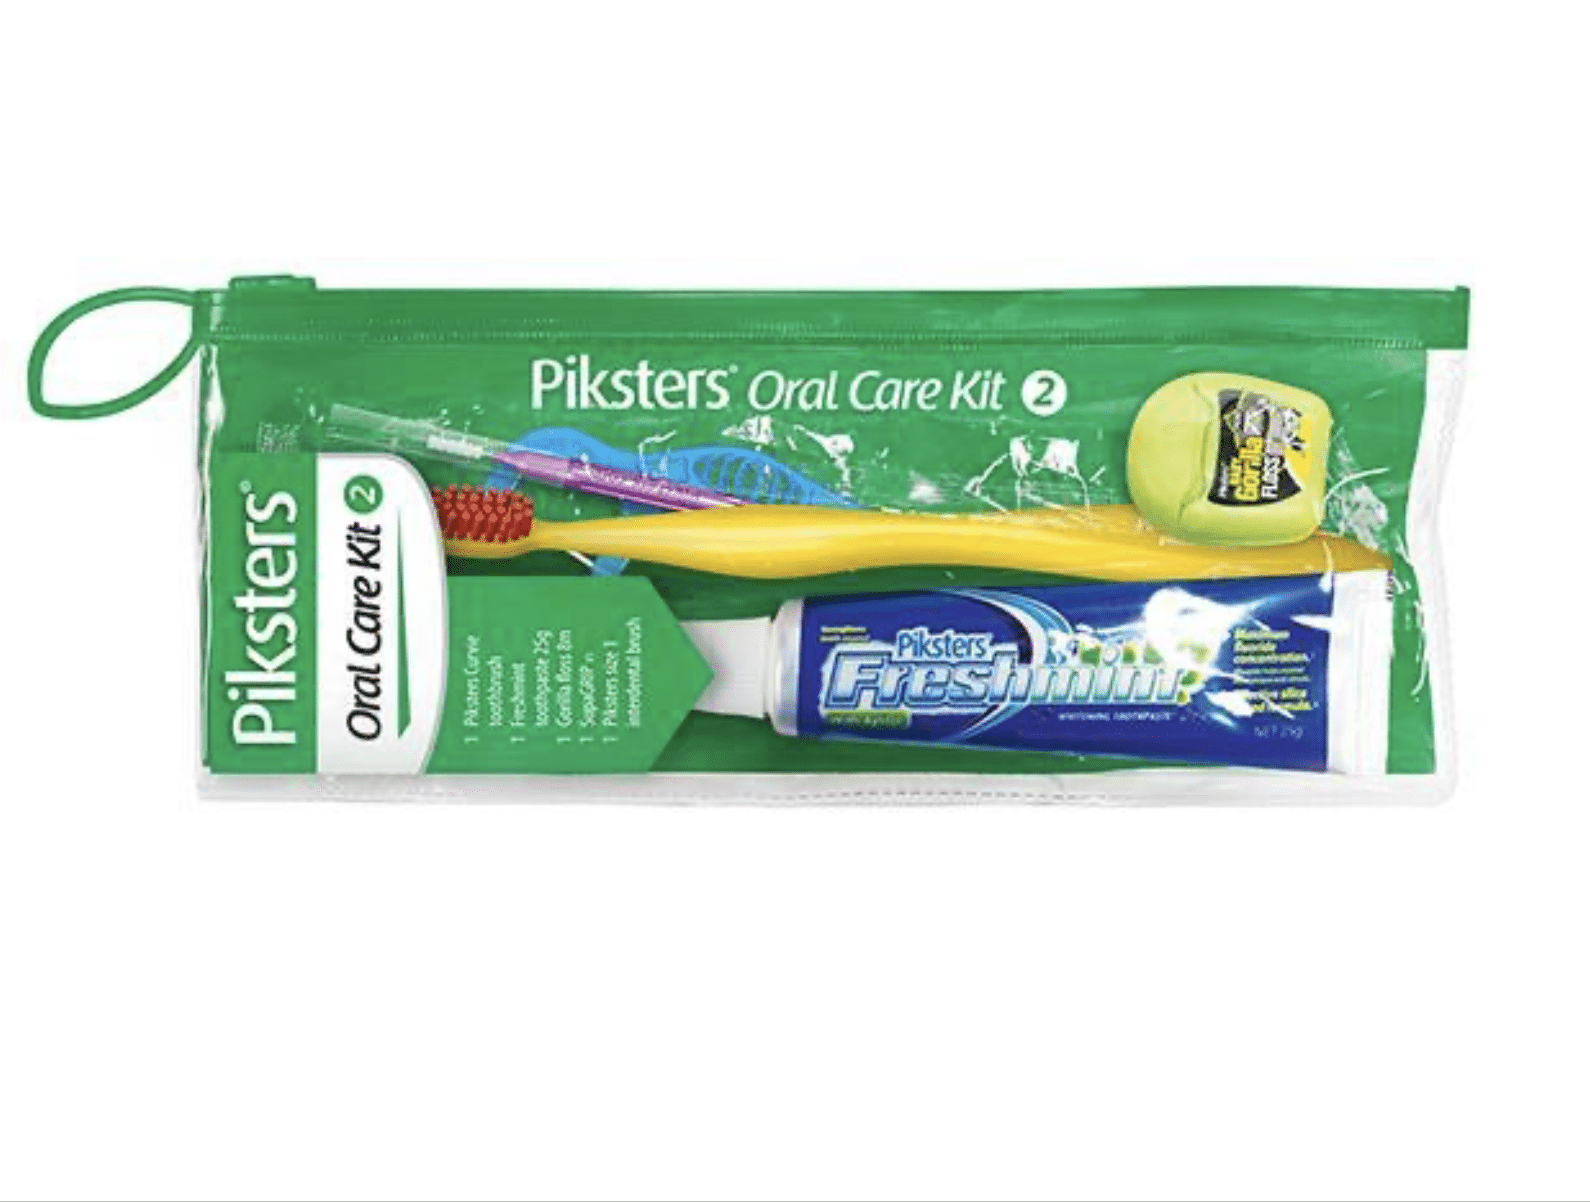 Piksters adult oral care travel kit (£ 5.00)